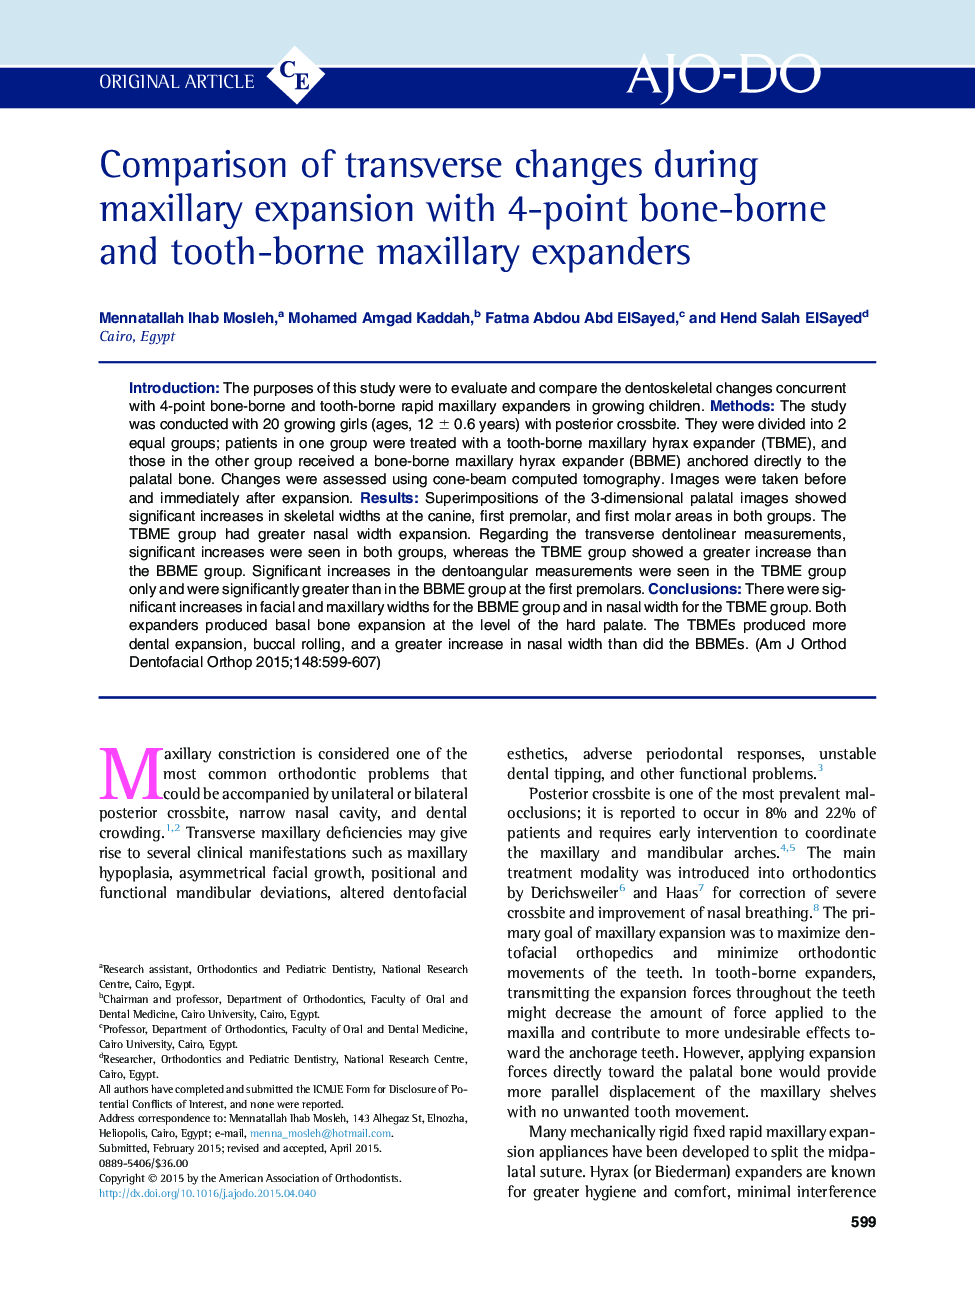 Comparison of transverse changes during maxillary expansion with 4-point bone-borne and tooth-borne maxillary expanders 